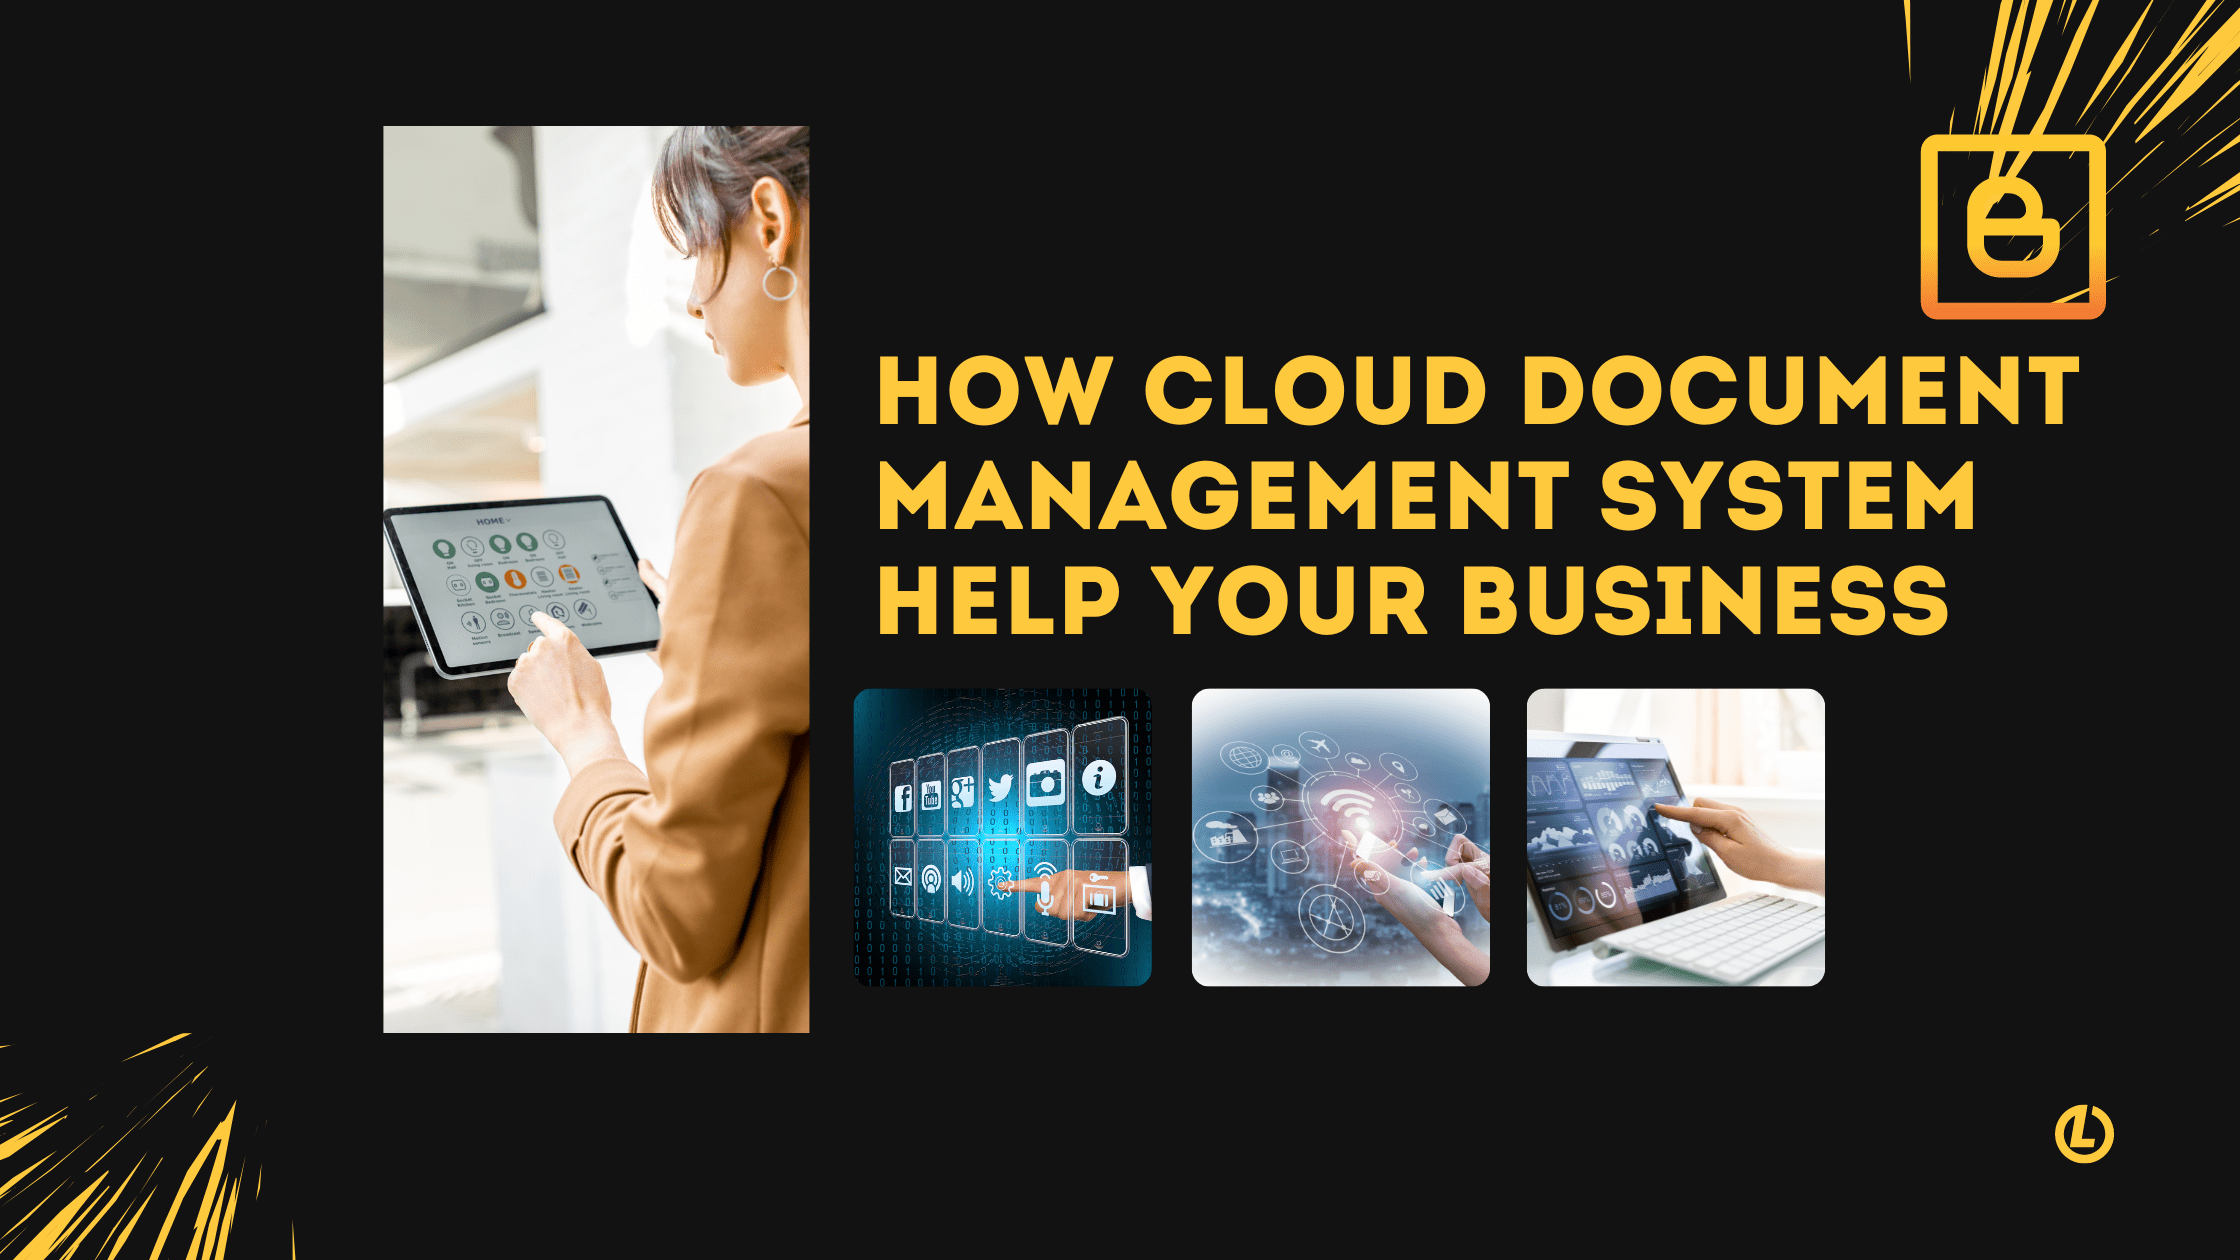 How does Cloud Document Management System Can Help Your Business In Long Run?